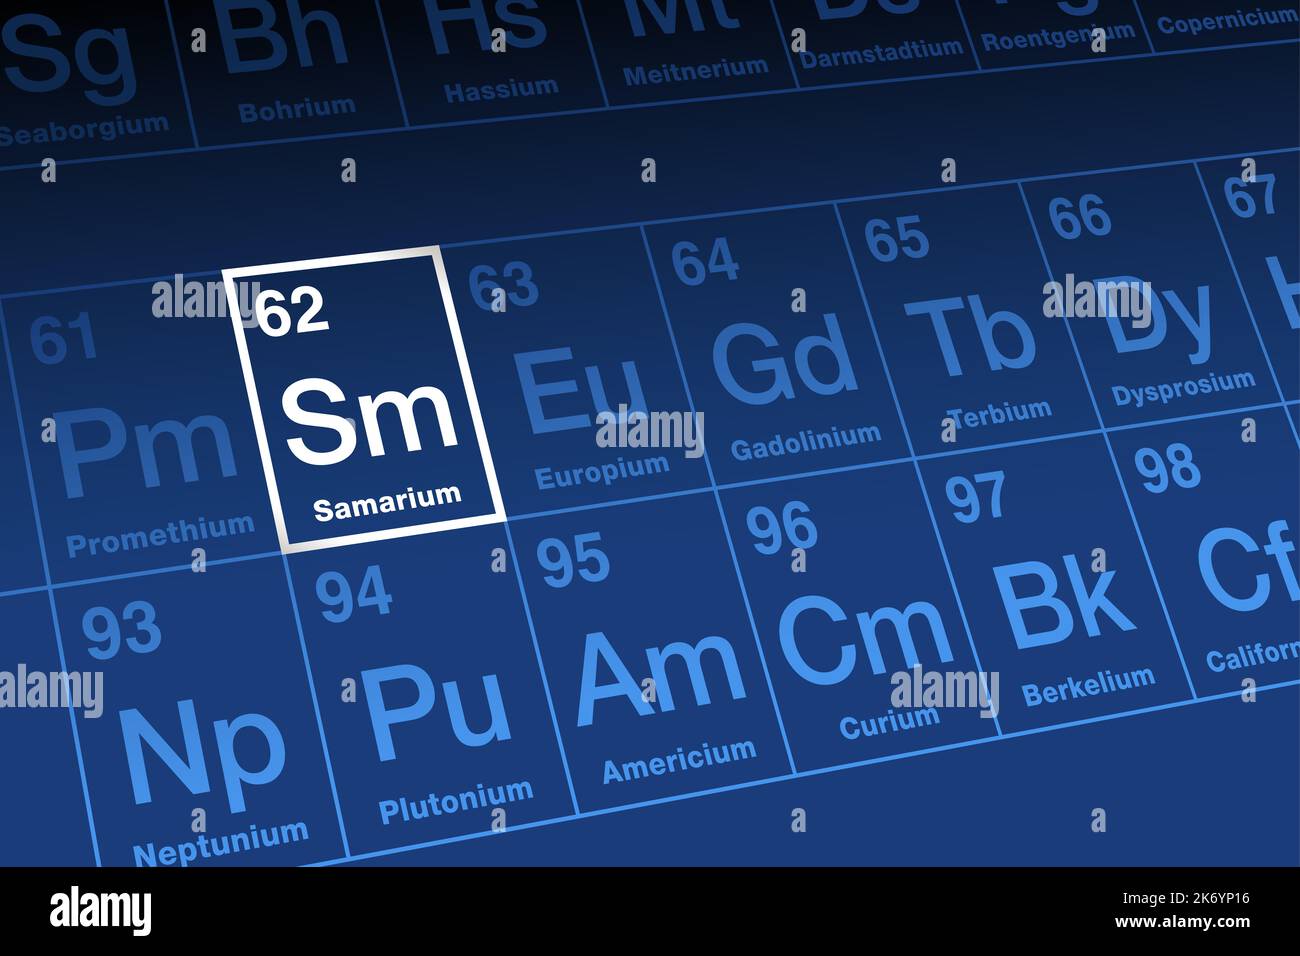 Samarium, on periodic table. Rare earth metal in lanthanide series, with atomic number 62 and element symbol Sm, named after the mineral samarskite. Stock Photo